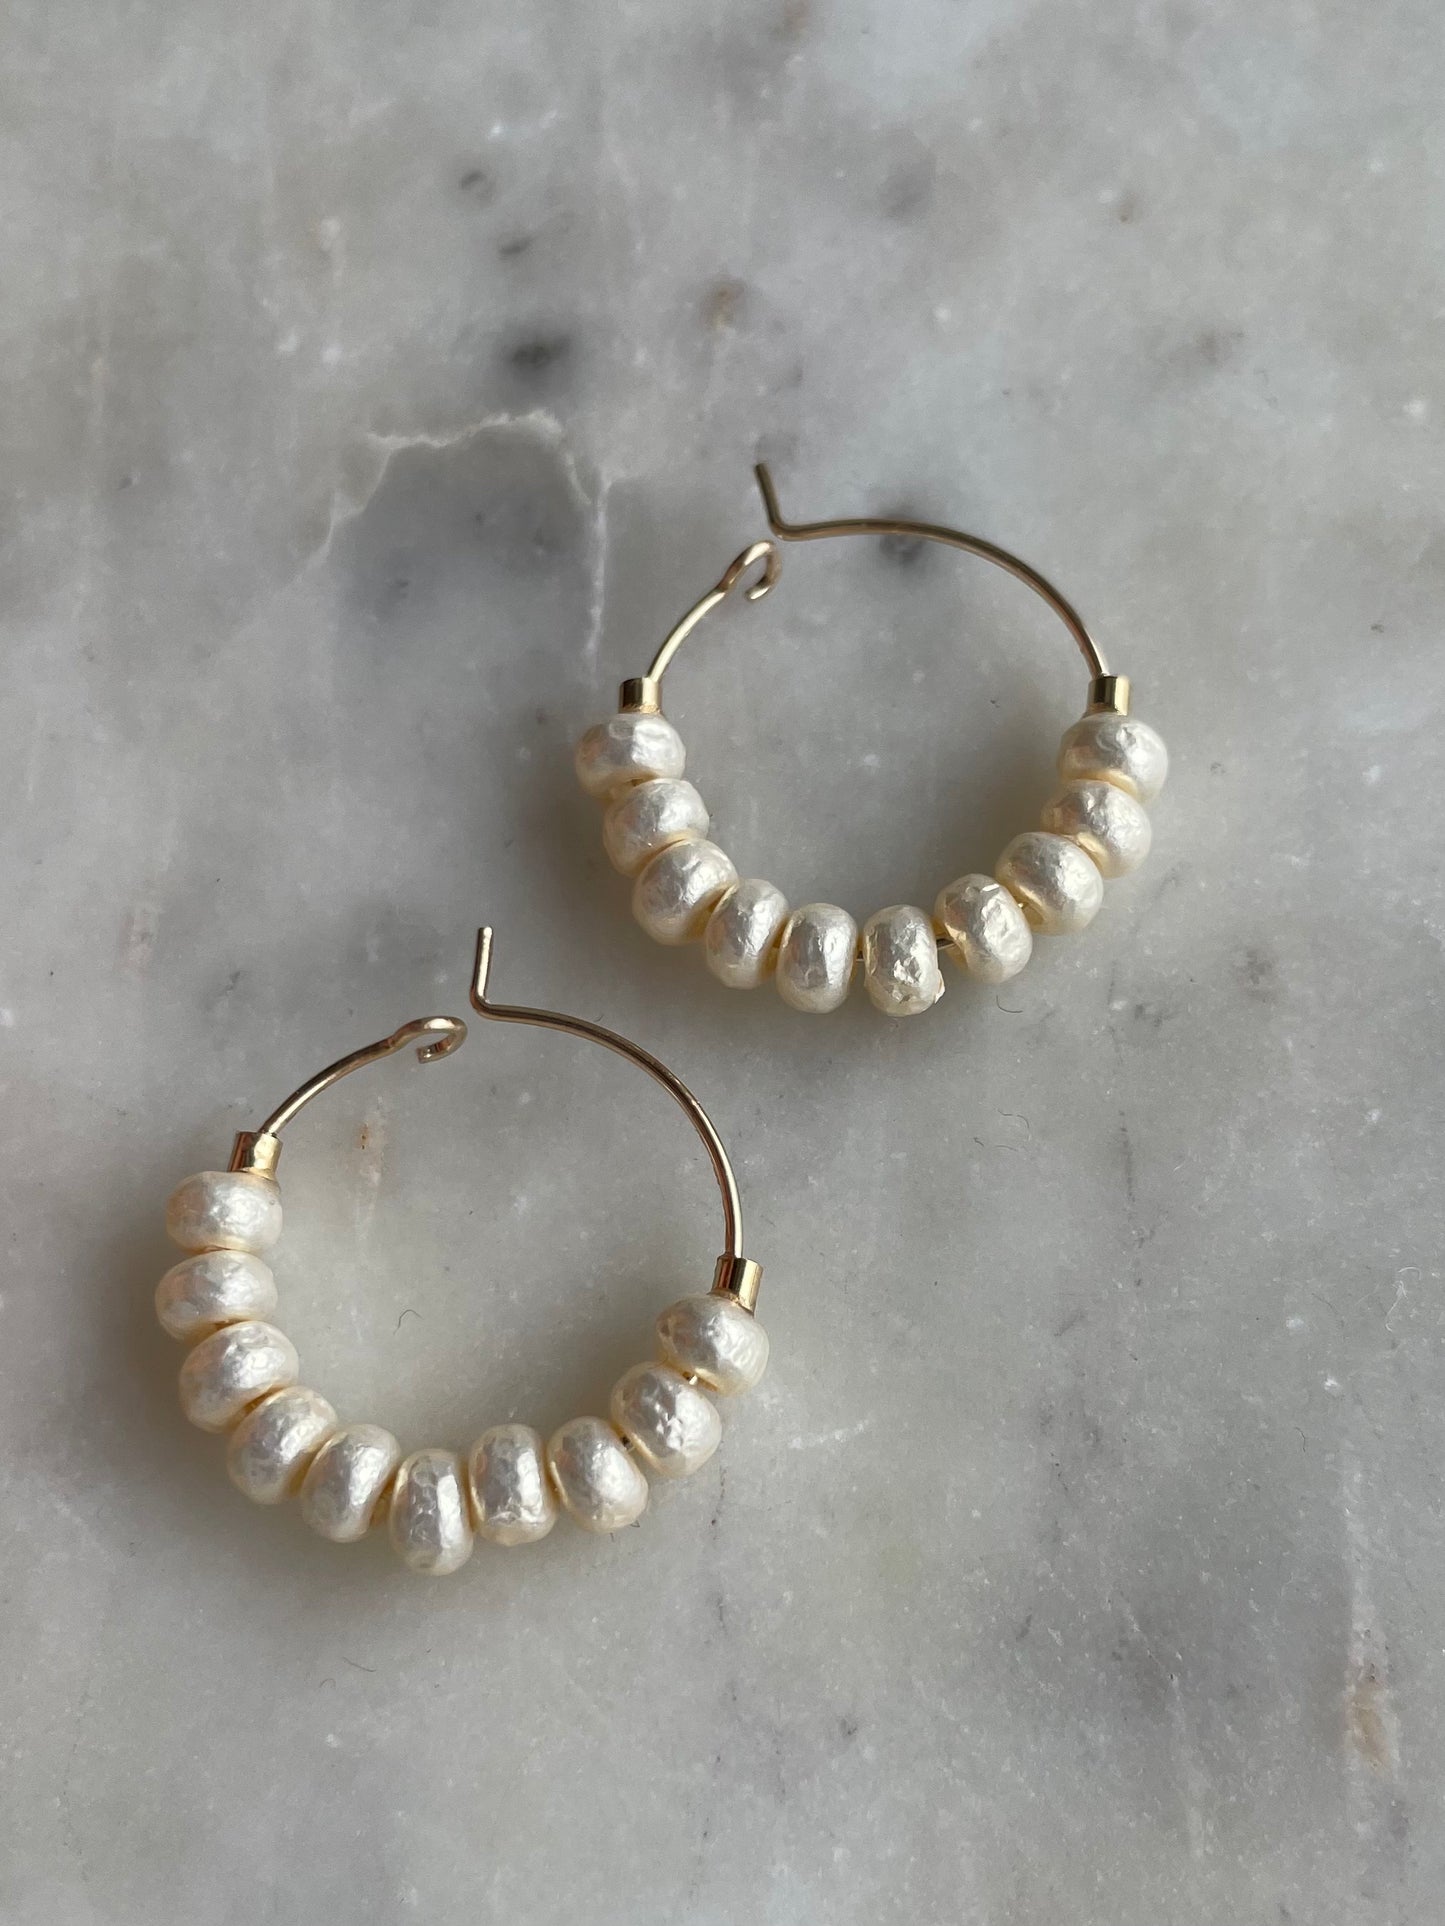 Medium Gold Plated Hoop Earrings with Pearl Style Glass Beads